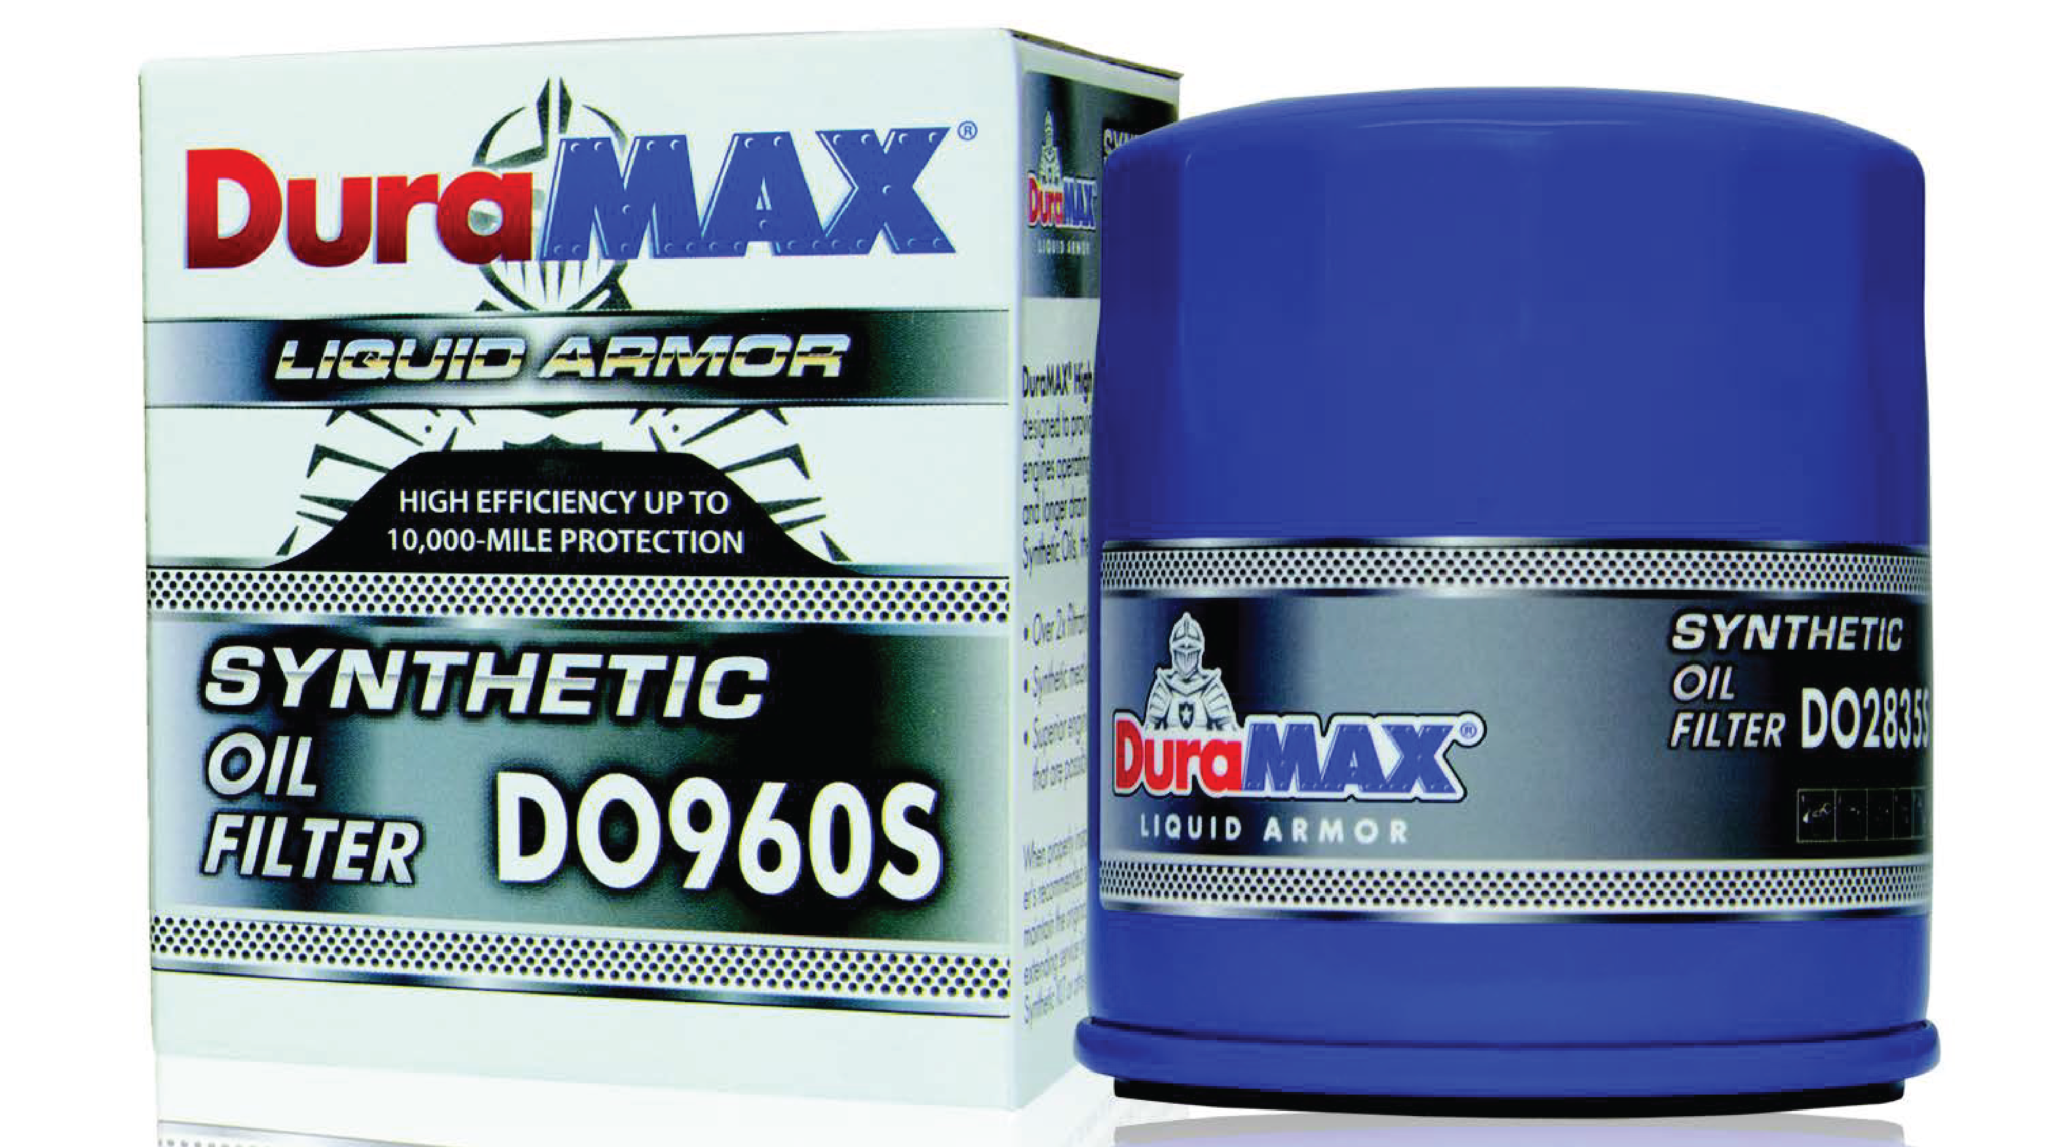 Introducing DuraMAX Synthetic Oil Filter RelaDyne